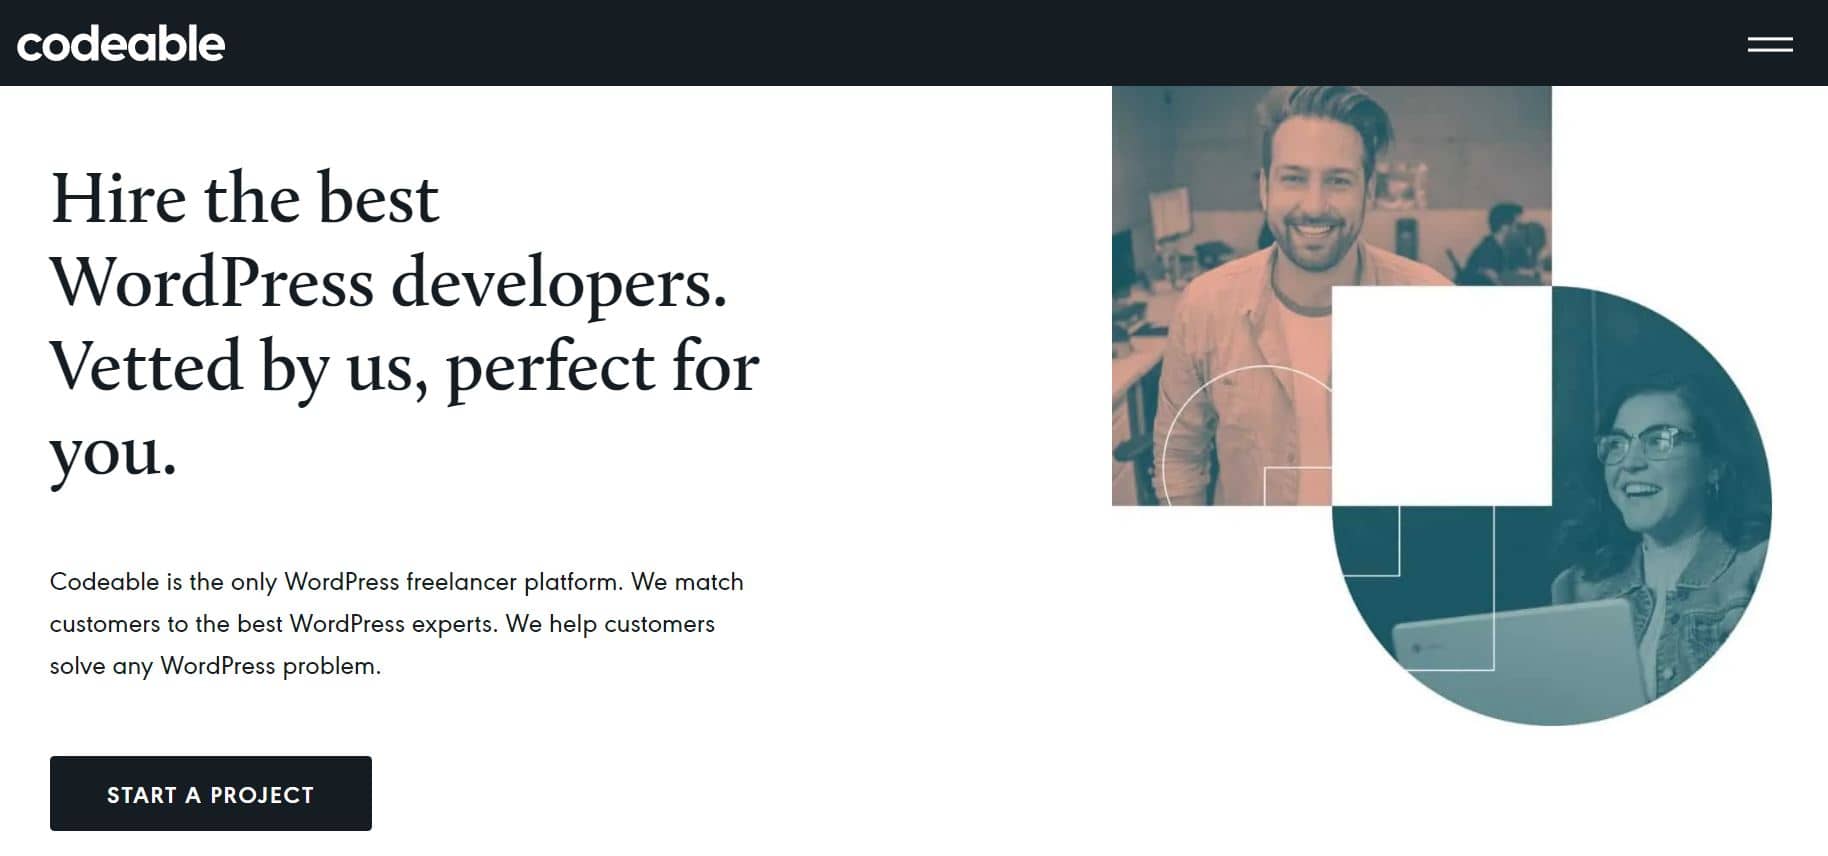 codeable hire WordPress developers